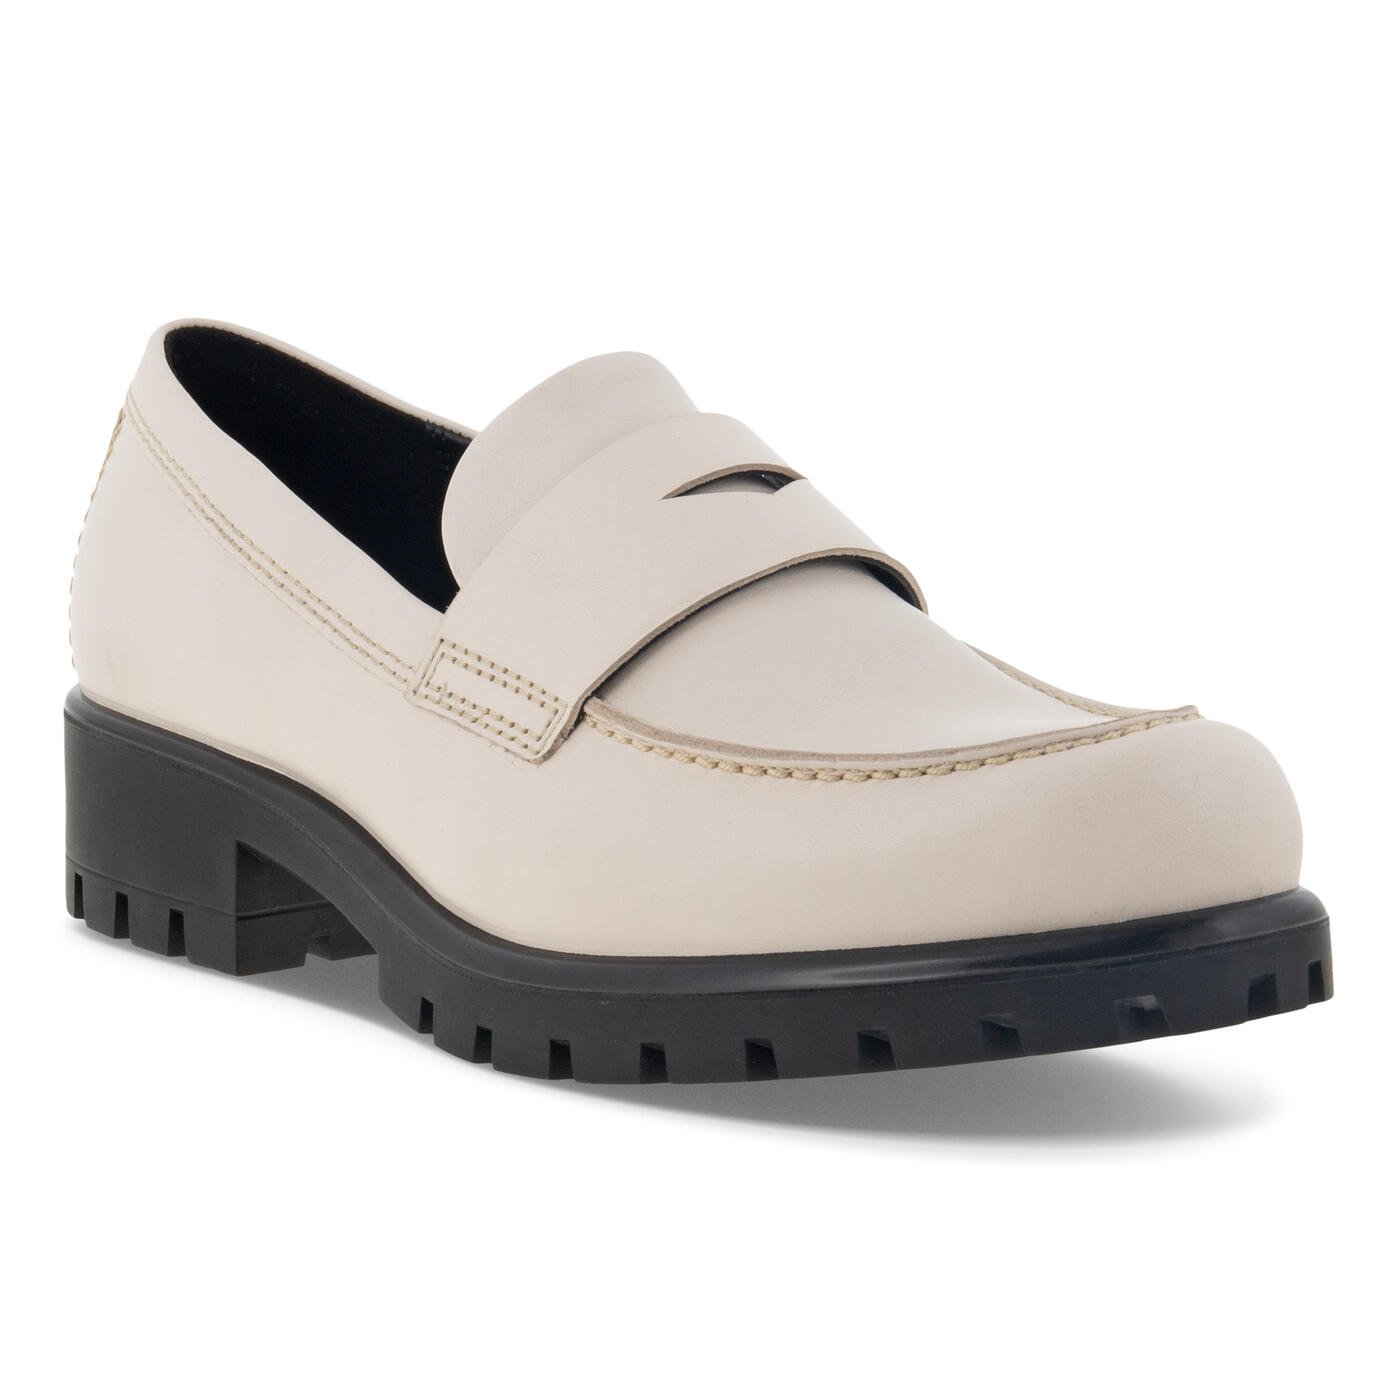 ECCO WOMEN'S MODTRAY PENNY LOAFER | Official ECCO® Shoes